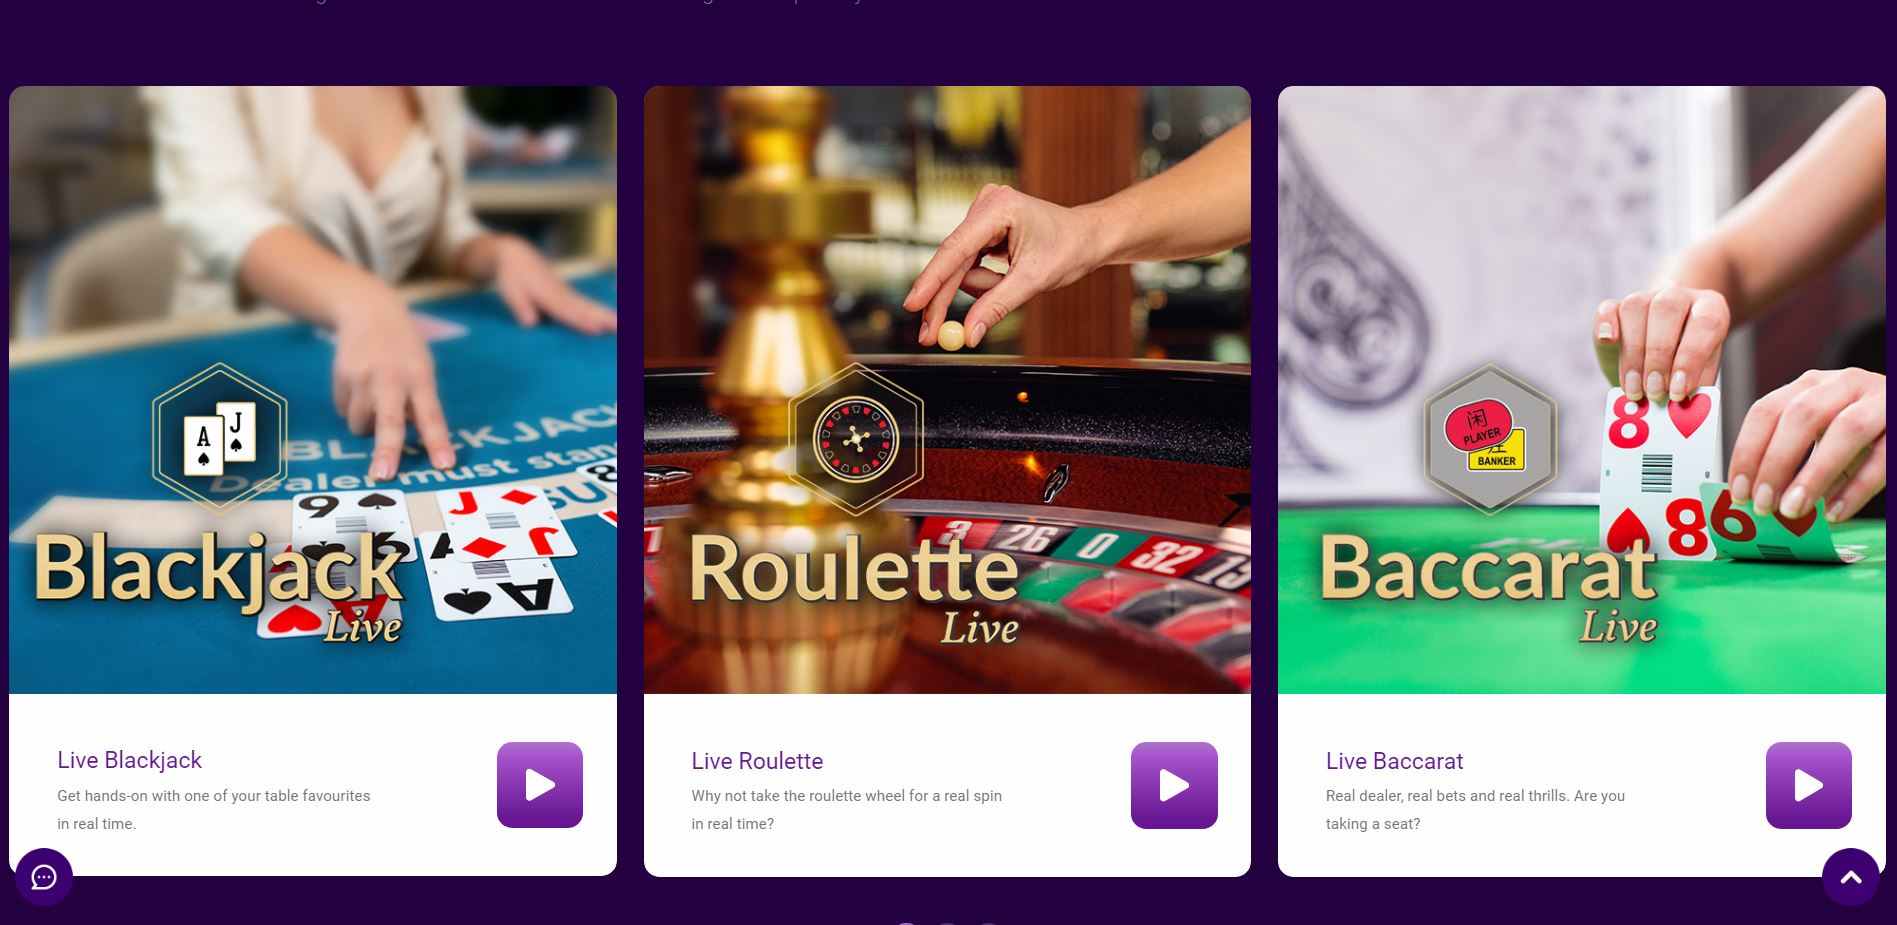 JackpotCity casino offers a wide variety of live-dealer games